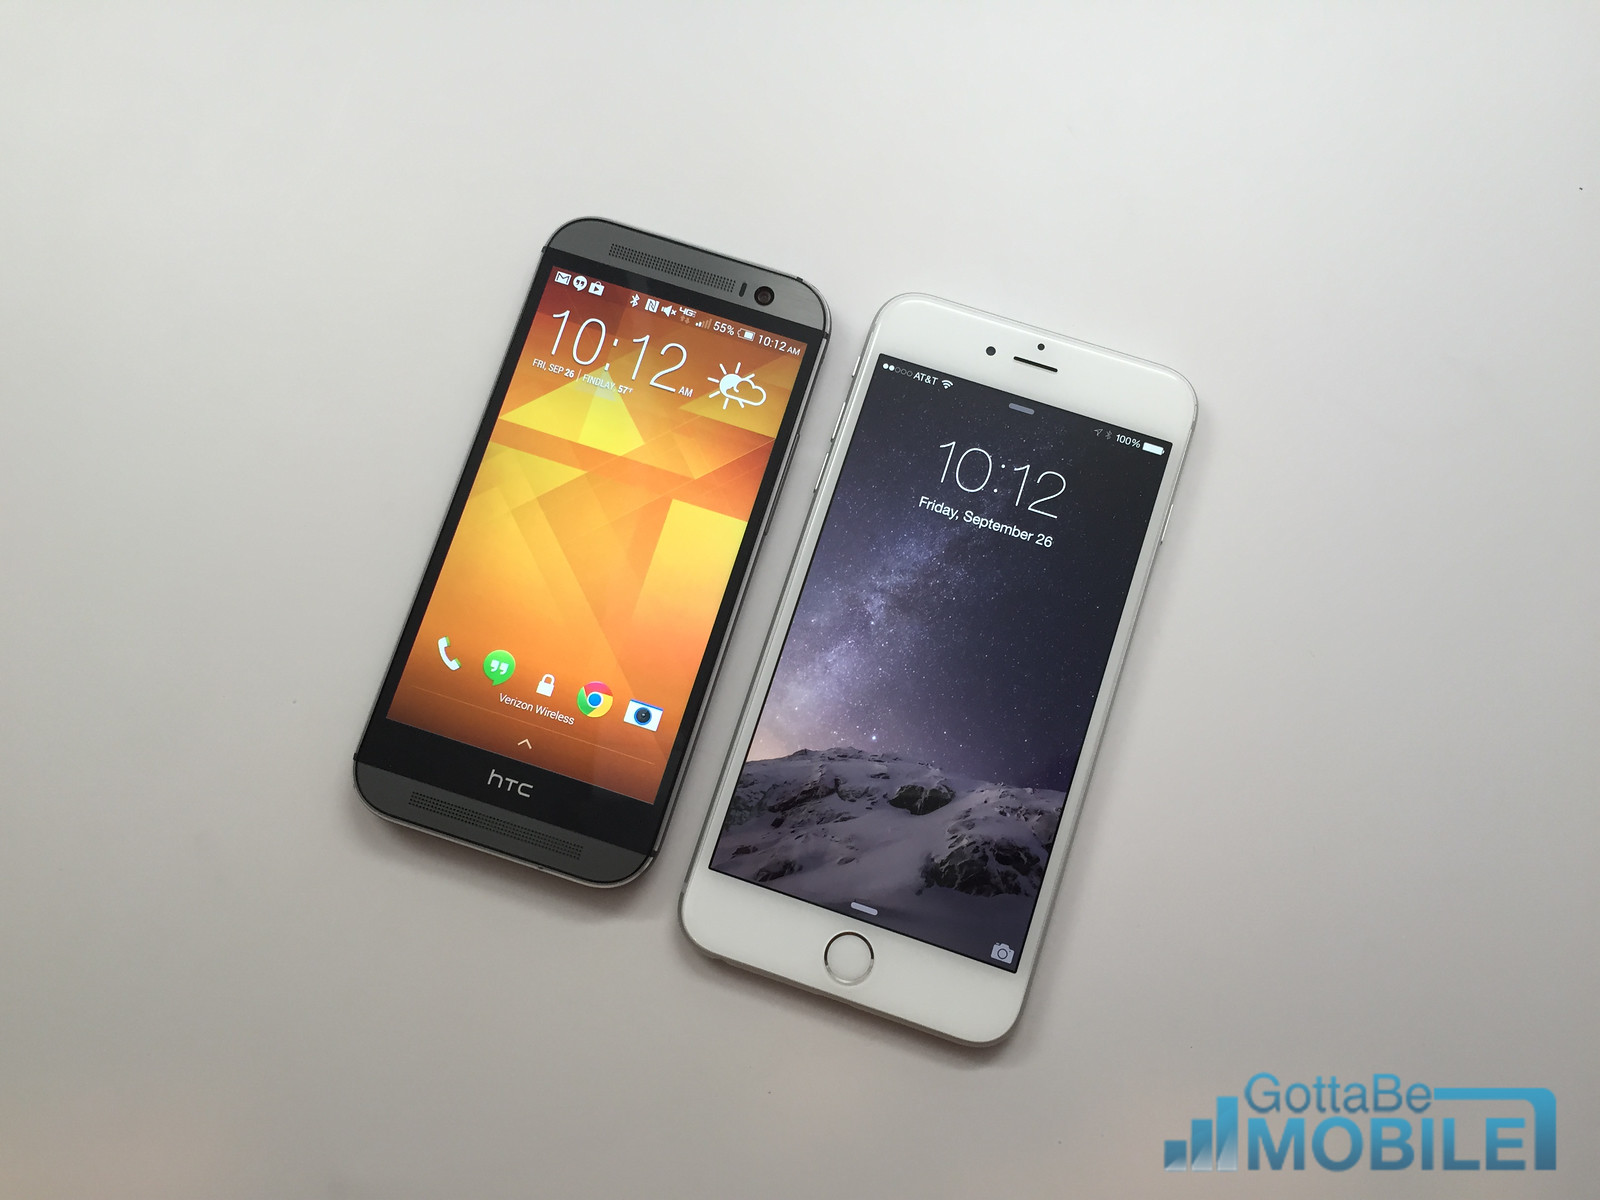 Learn what buyers need to know about the iPhone 6 Plus and HTC One M8.